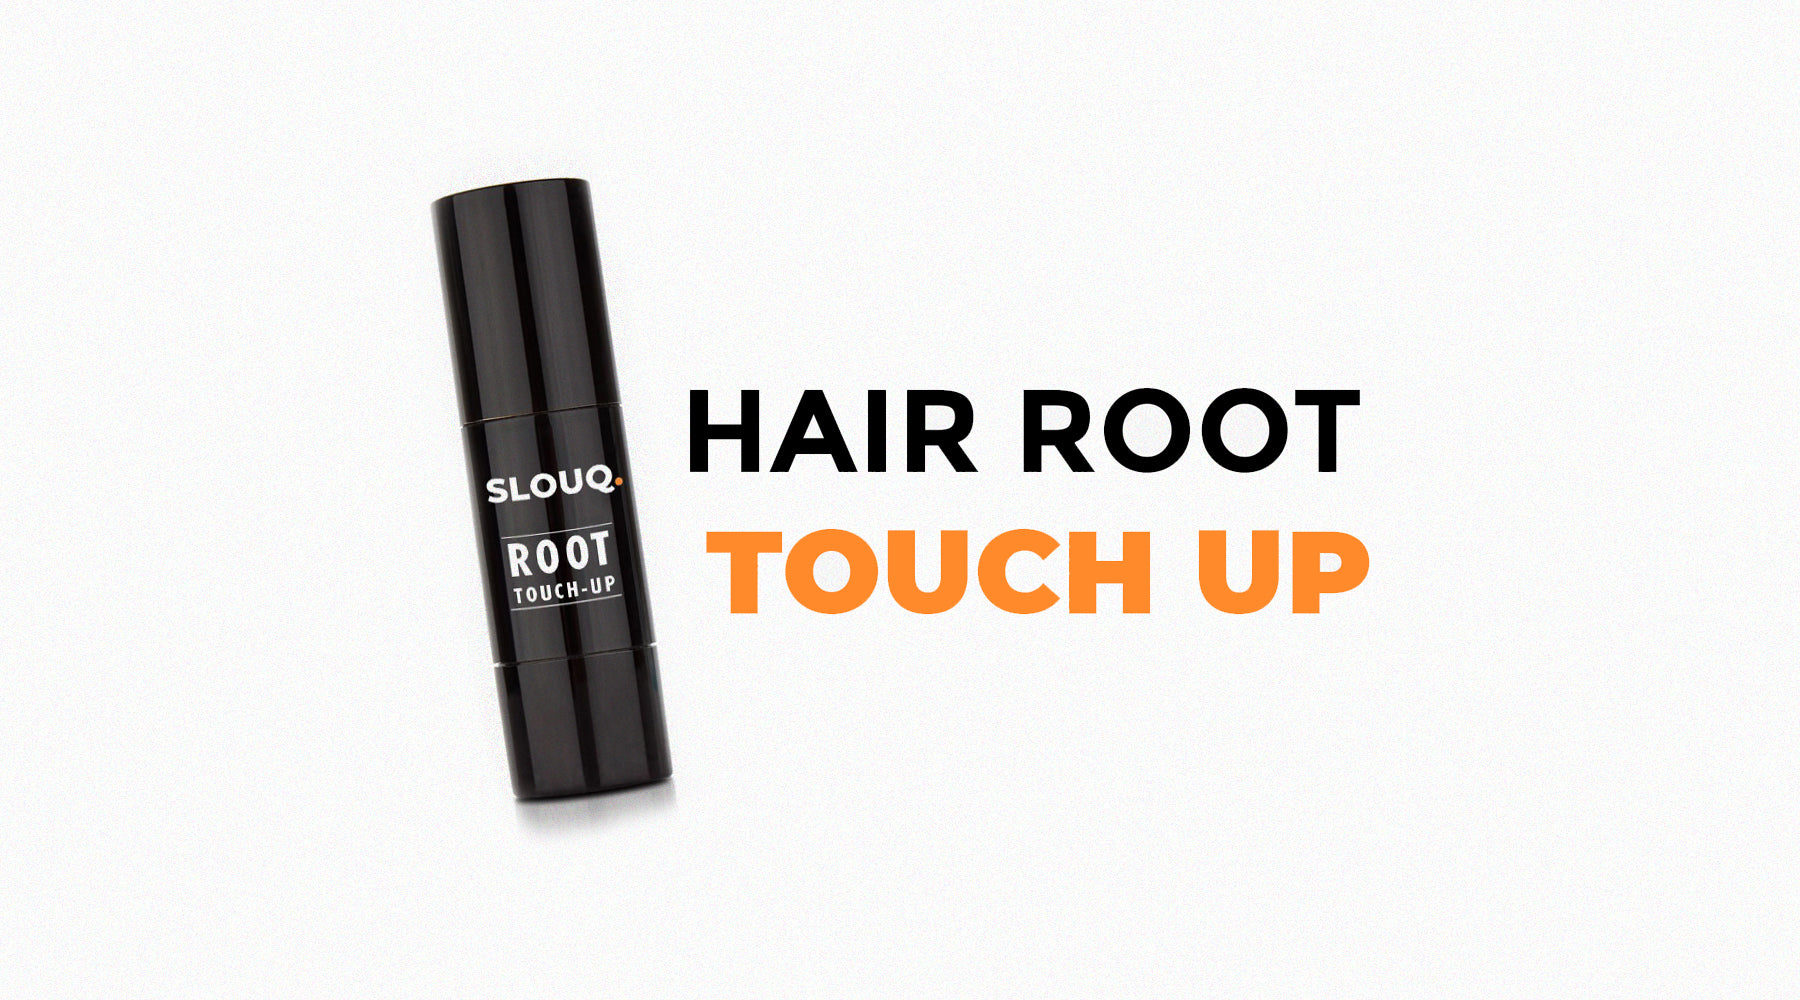 SLOUQ Hair Color Stick: A Must-Have in Your Hair Care Routine